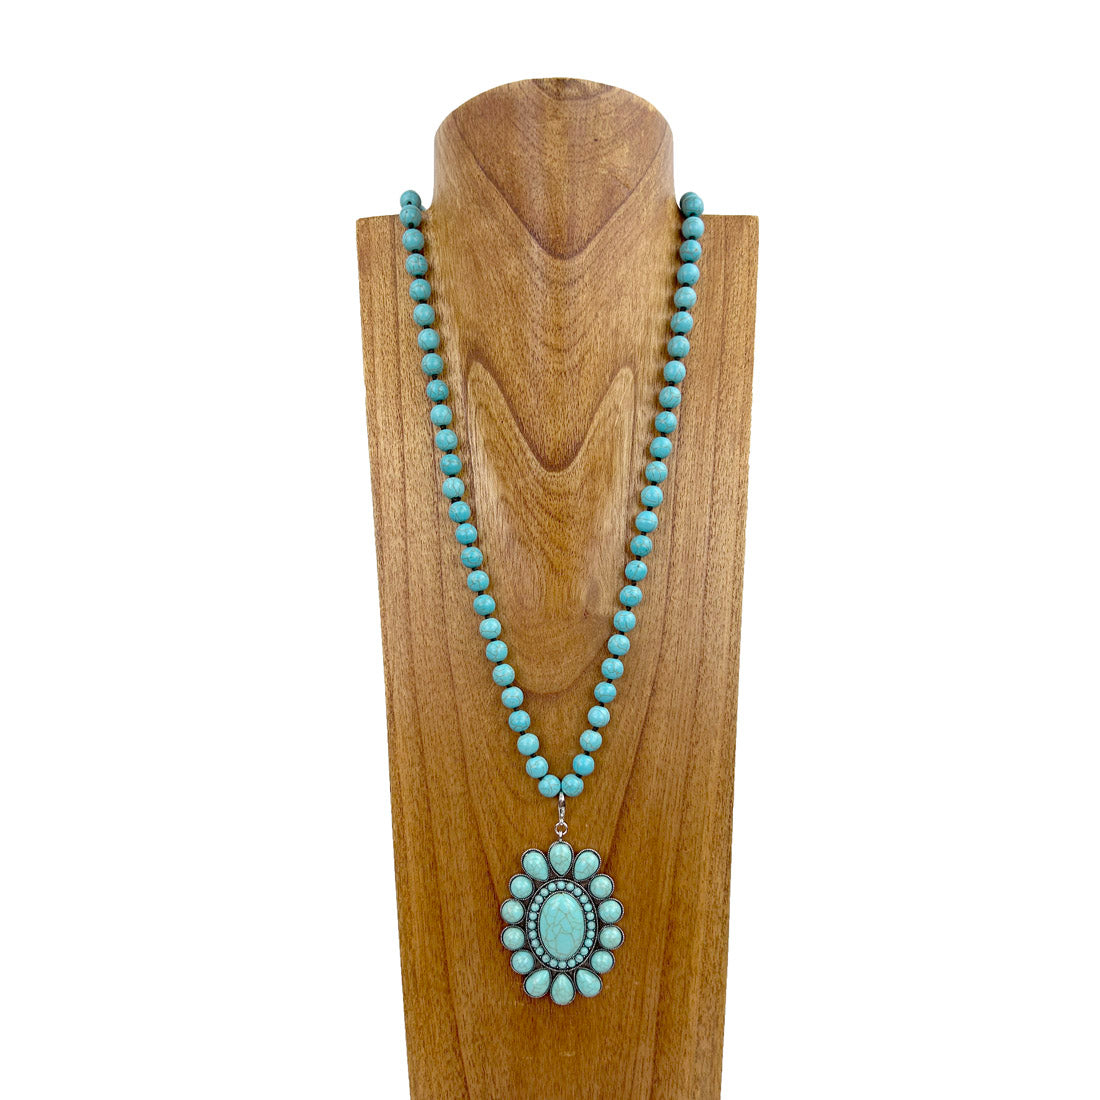 NKZ230924-04     34 inches 10mm blue turquoise stone beads with big blue turquoise stone concho Necklace